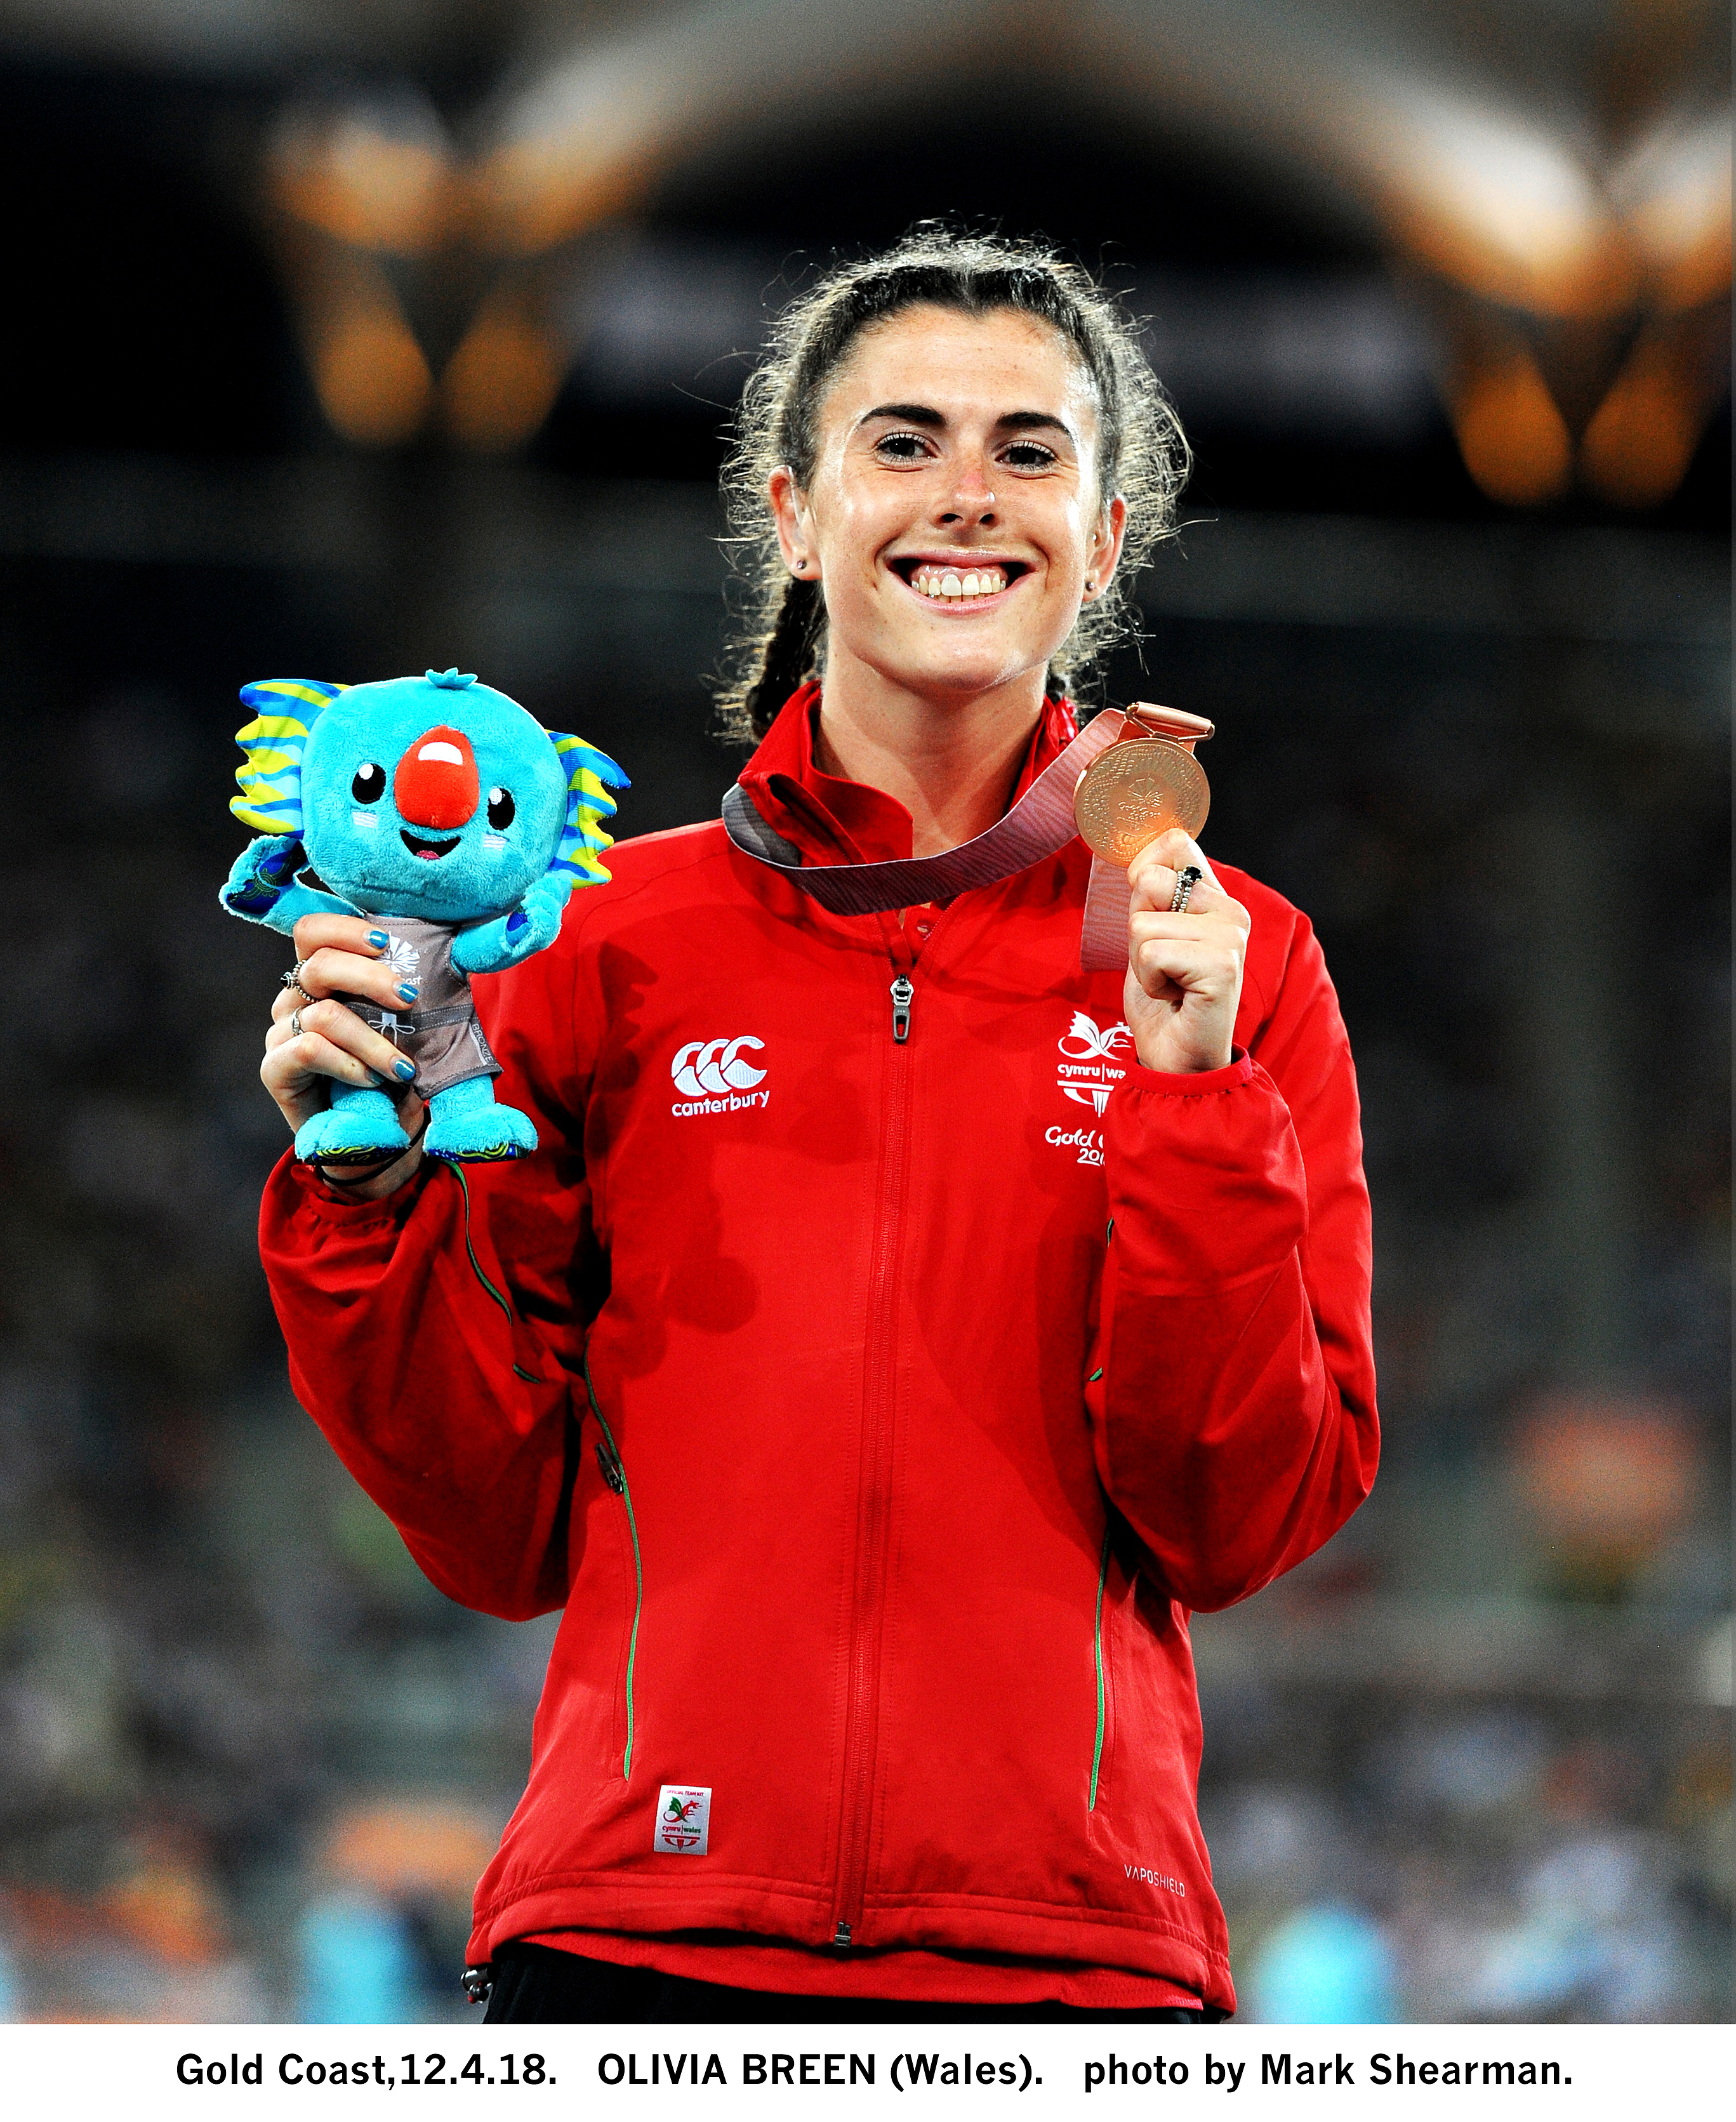 Olivia Breen celebrating winning a medal at the Commonwealth Games 2018